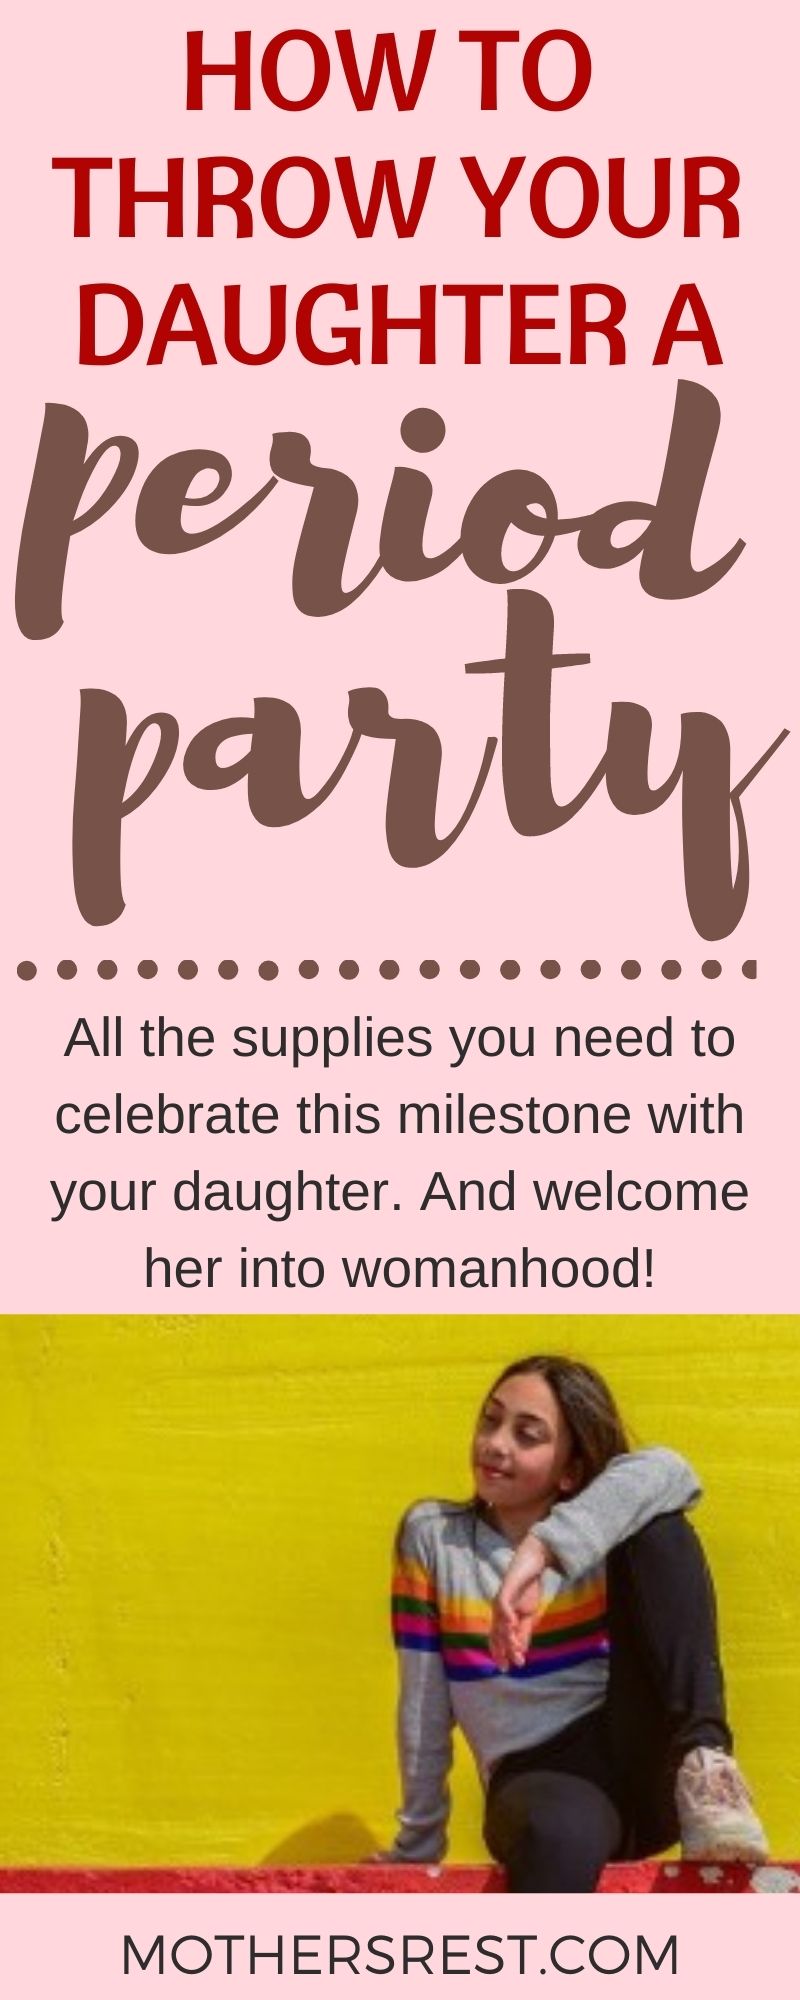 All the supplies you need to celebrate this milestone with your daughter. And welcome her into womanhood! Including period panties and Teen Vogue and maybe some Midol.